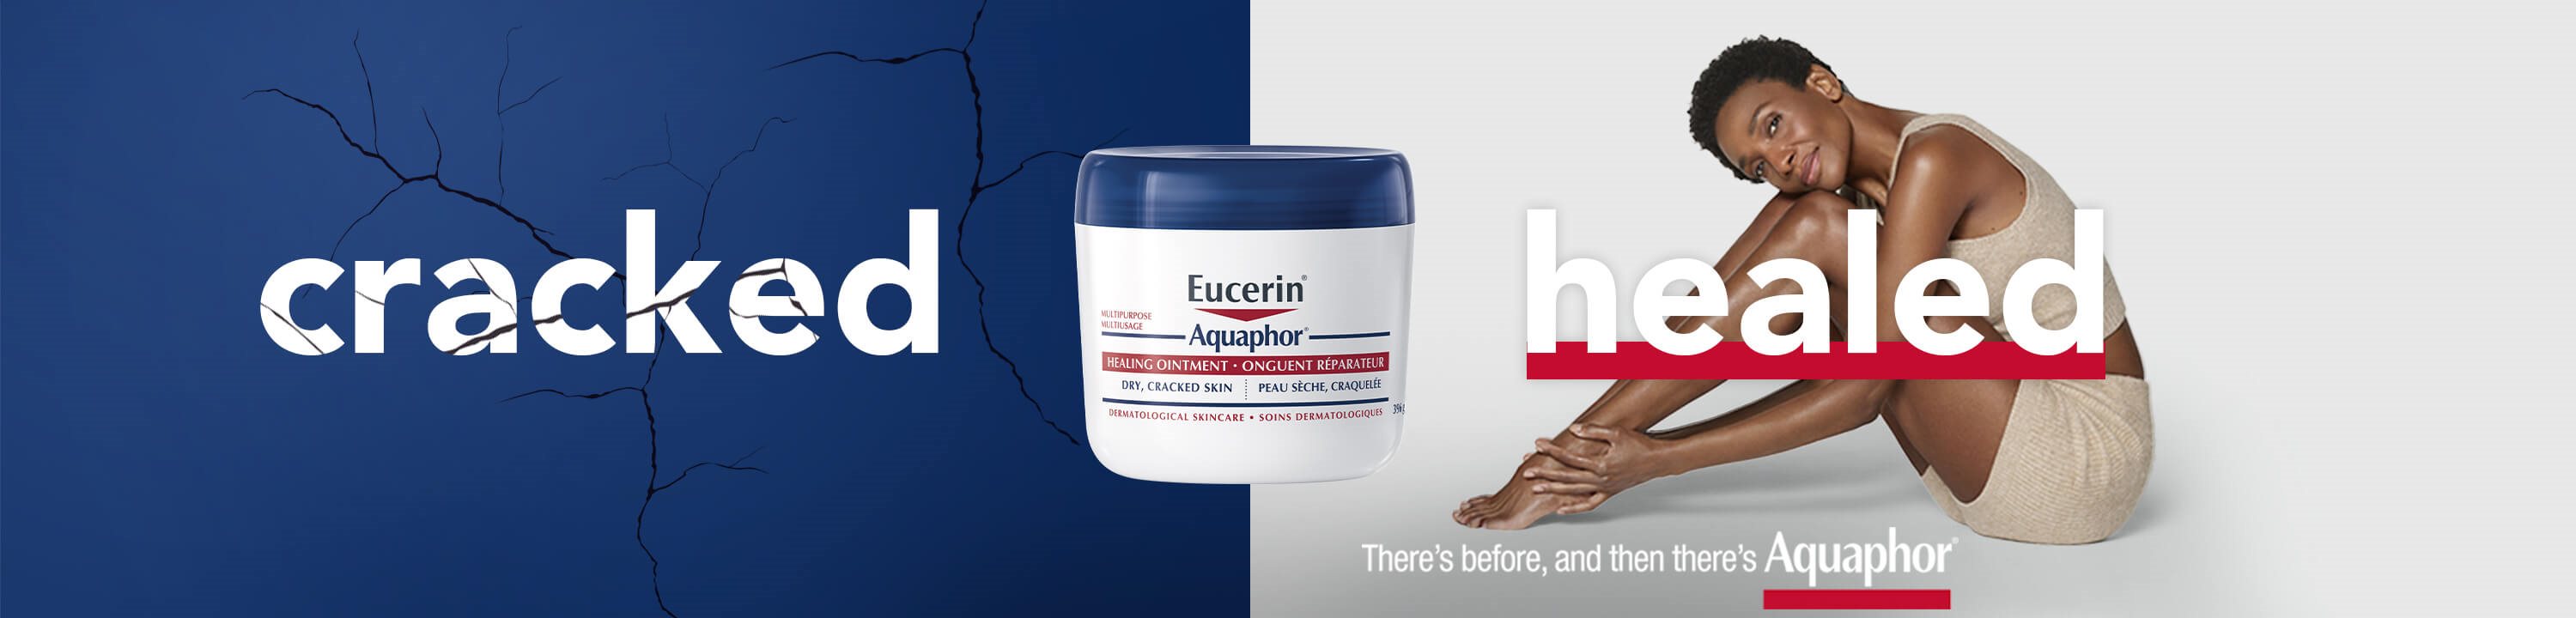 View of a female model with her head resting on her bent knees with a Eucerin Aquaphor Healing Ointment 396g product shown in the background.